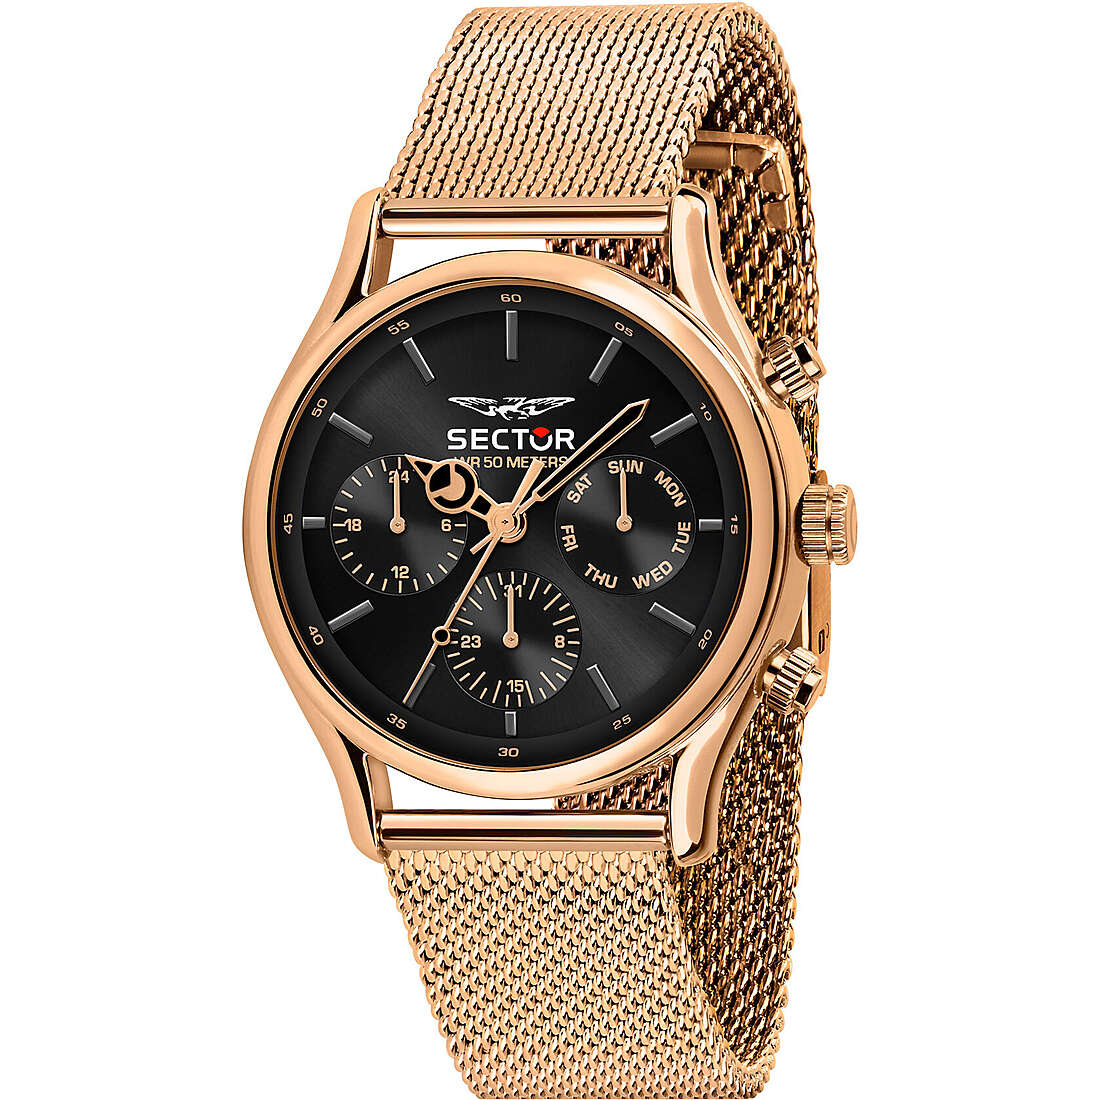 montre multifonction homme Sector 660 R3253517010